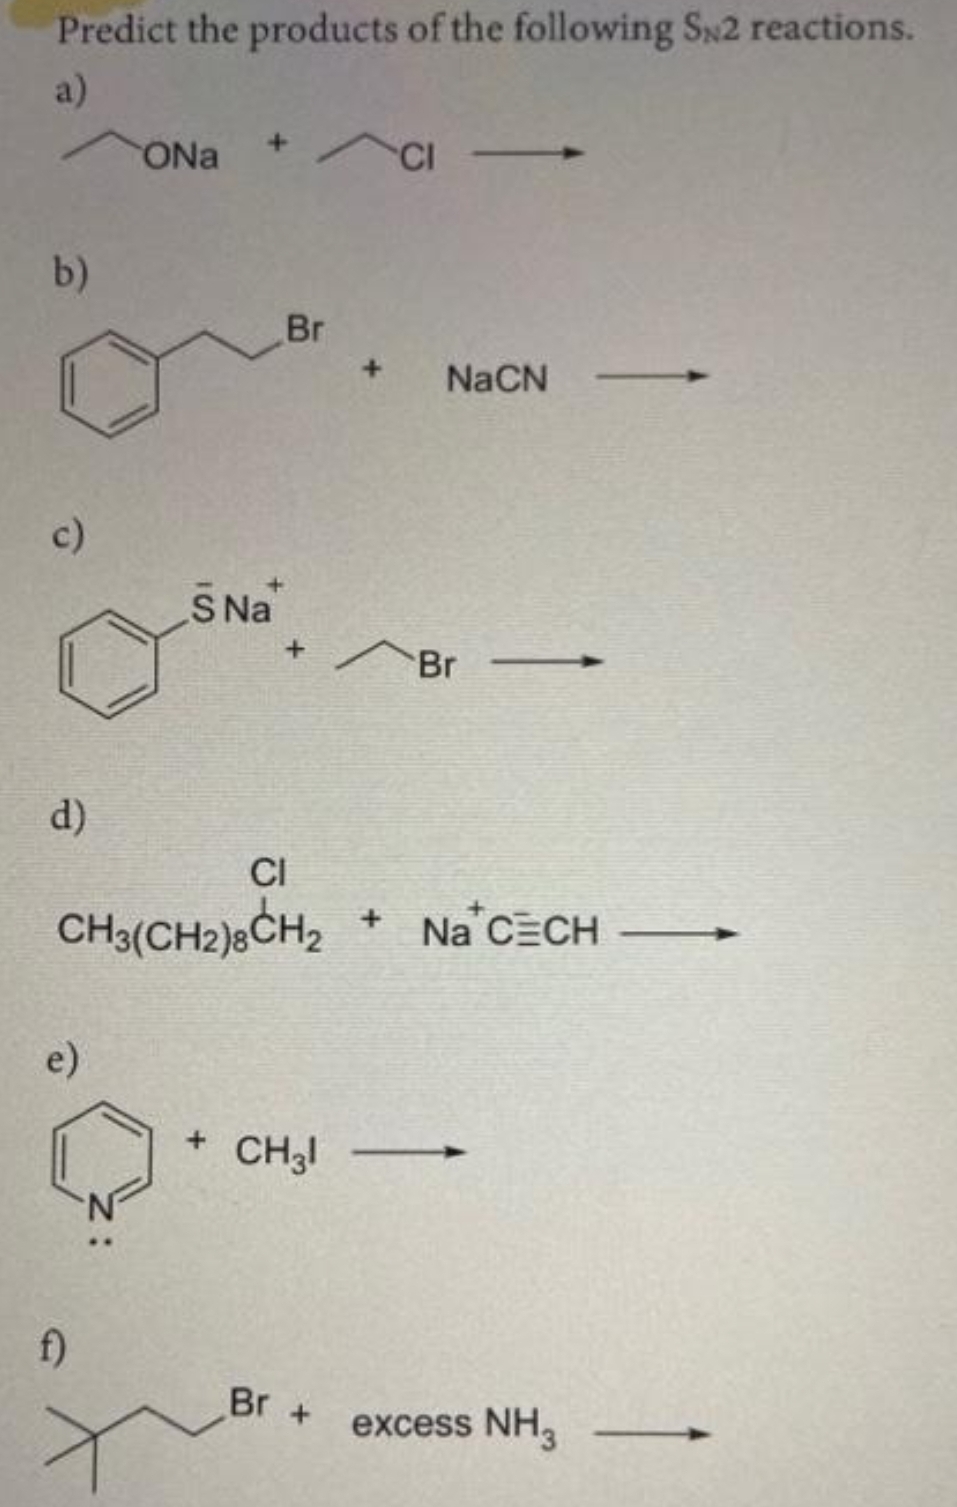 Predict the products of the following SN2 reactions.
a)
ONa +CI-
b)
Br
NaCN
c)
S Na
Br
d)
CI
CH3(CH2)8CH₂ + Na CECH
e)
-
+ CH31
excess NH3
f)
+
Br +